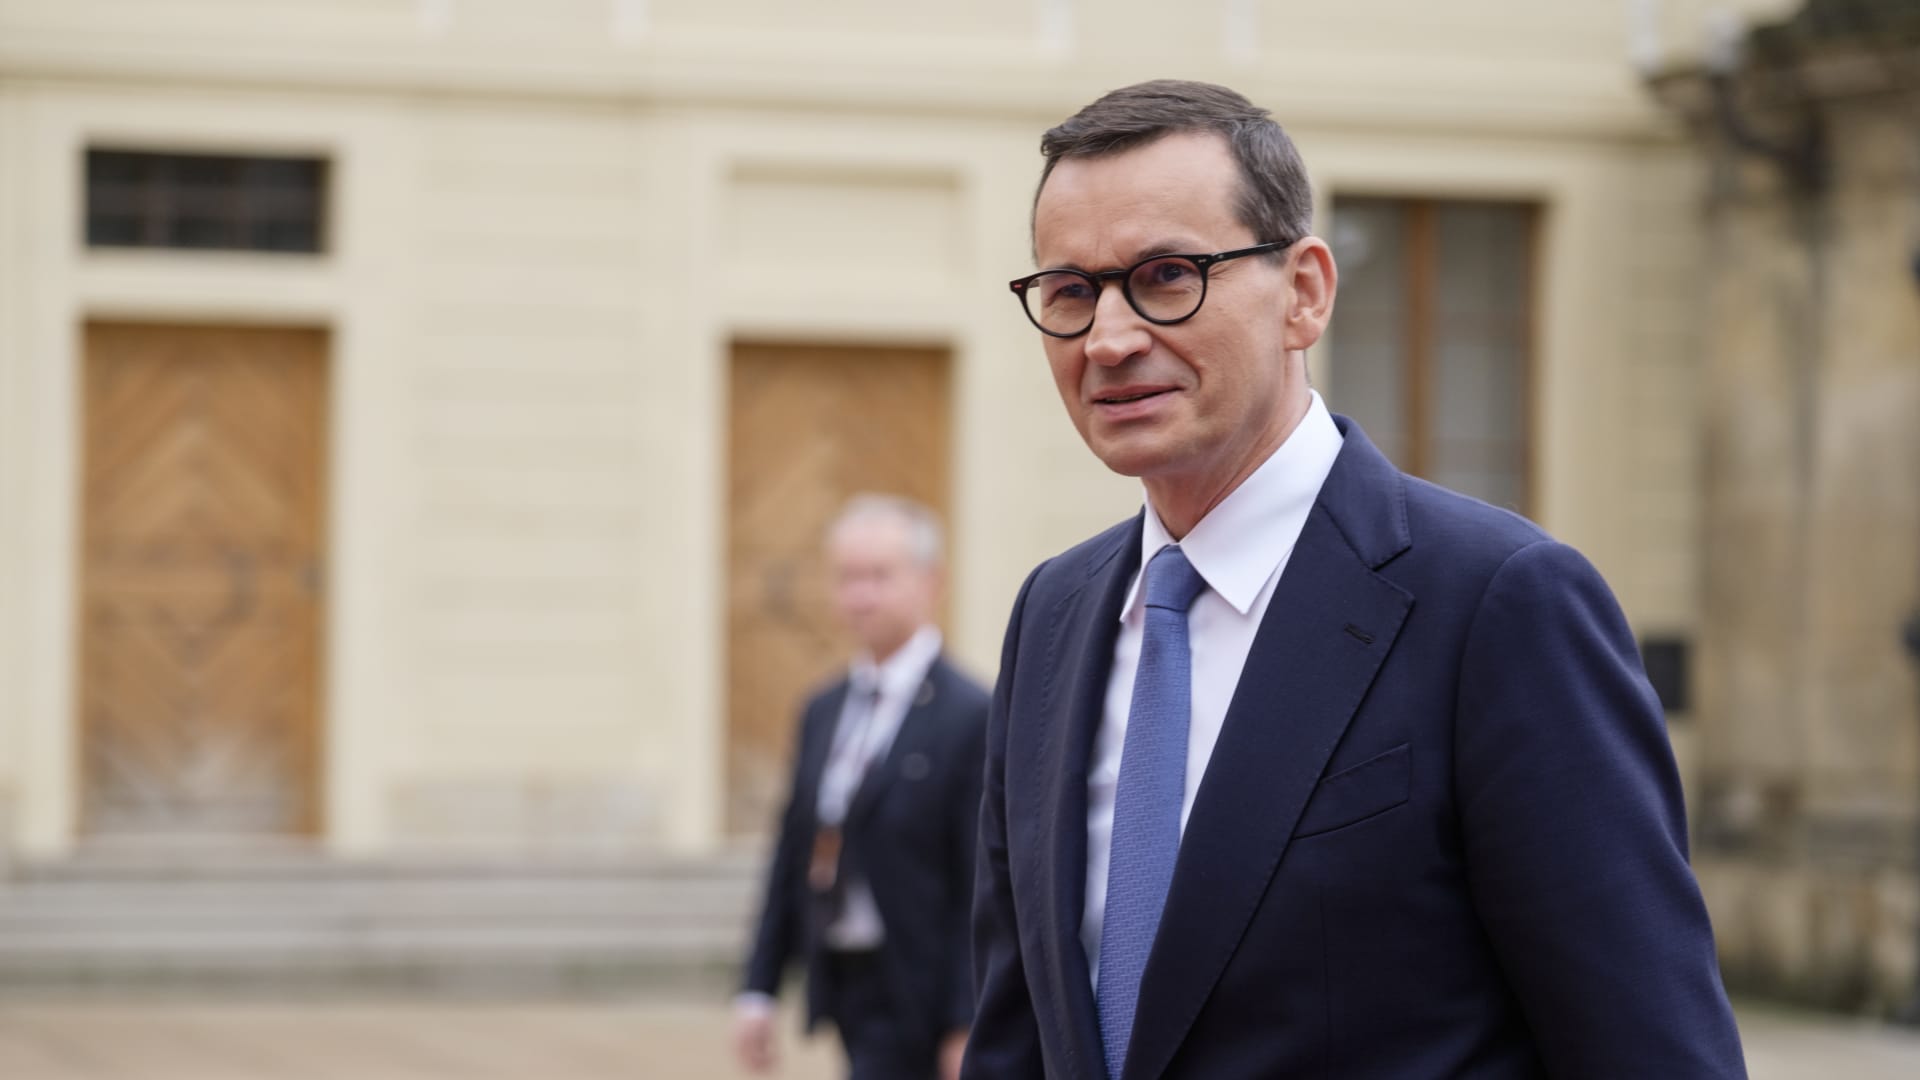 Polish Prime Minister Mateusz Morawiecki, along with leaders from Belgium, Italy and Greece, will propose a plan for a 'gas price corridor' across Europe in an attempt to bring down soaring prices.